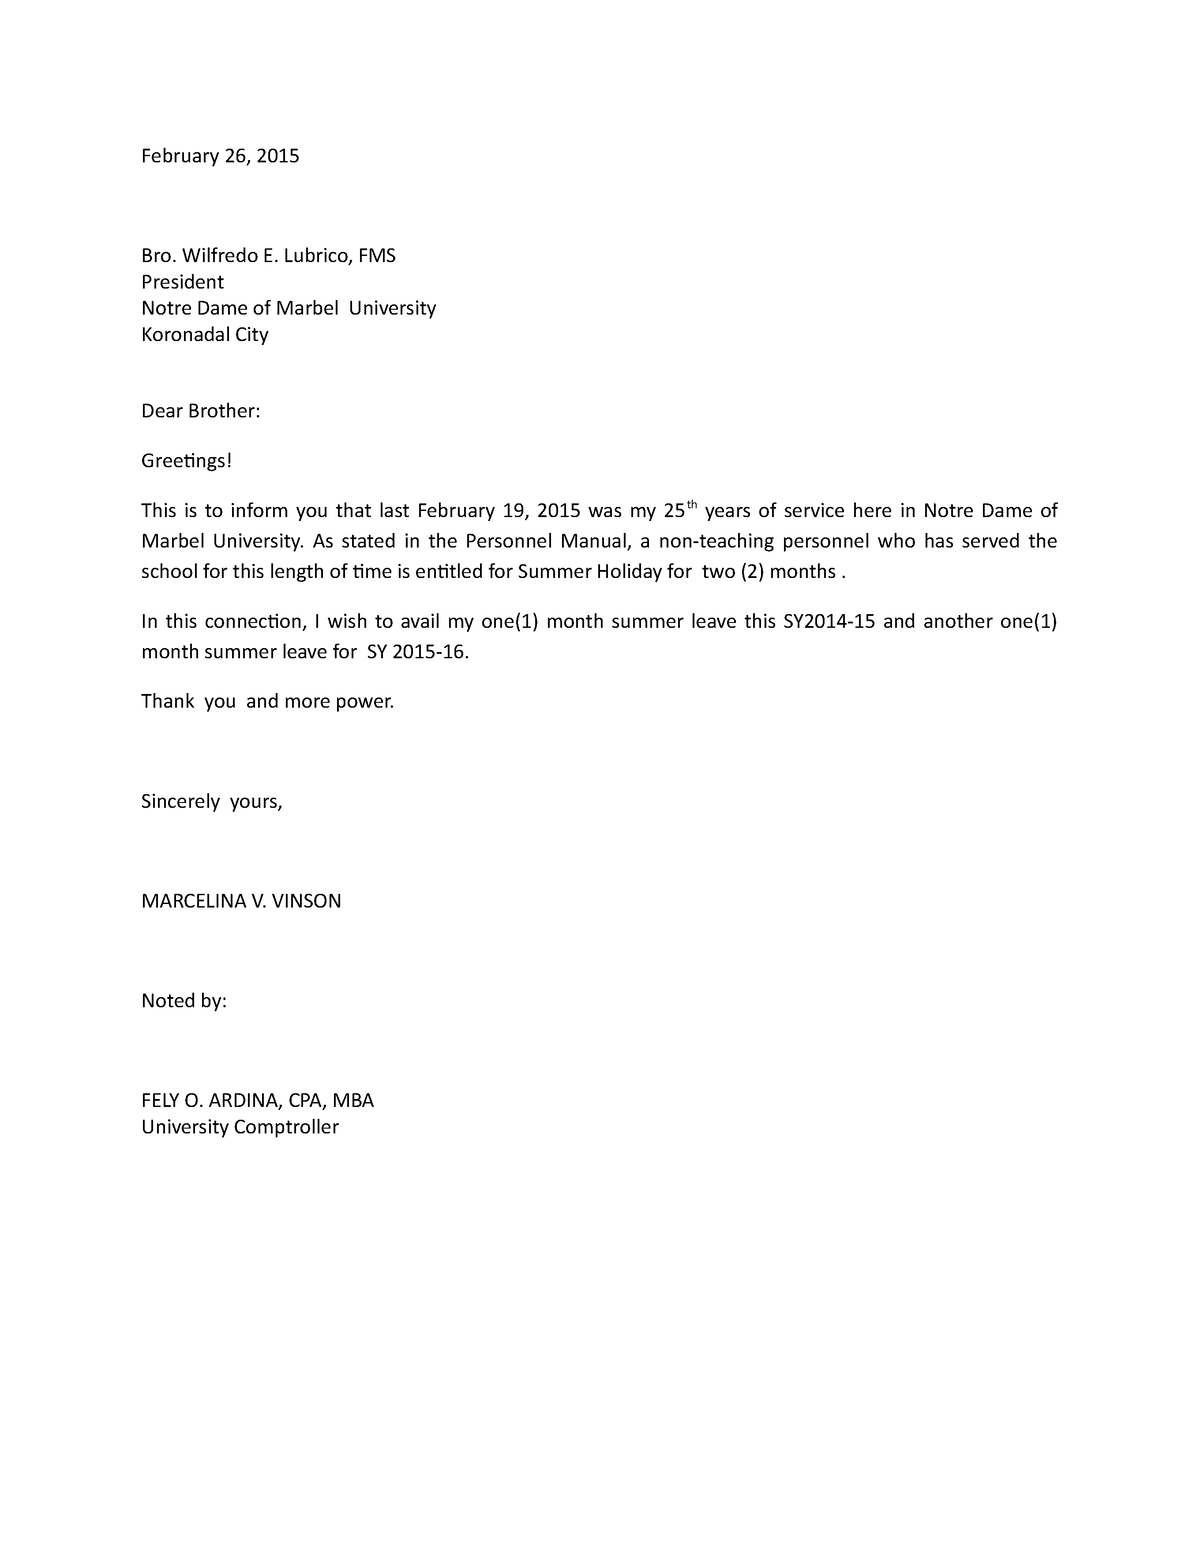 My letter for approval of my sabbathical leave - February 26, 2015 Bro ...